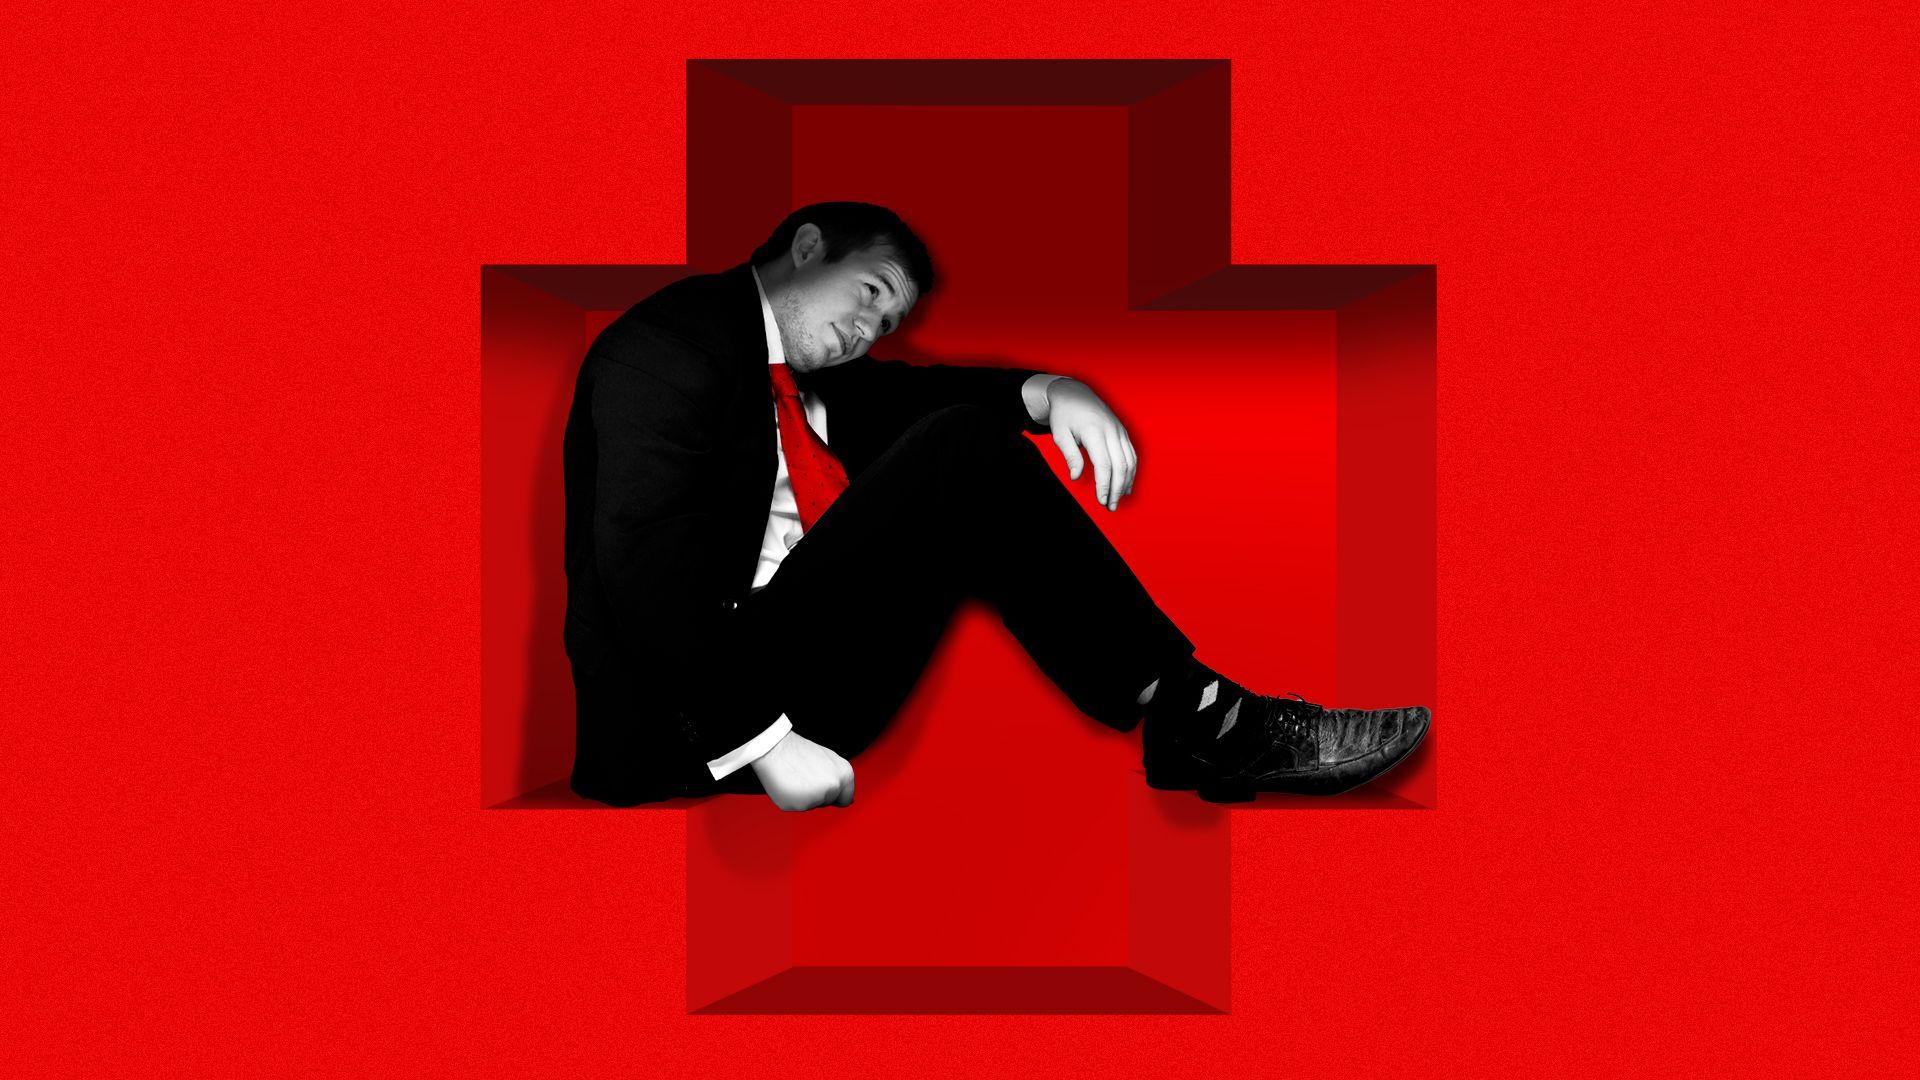 Illustration of a man inside of a red cross-shaped box